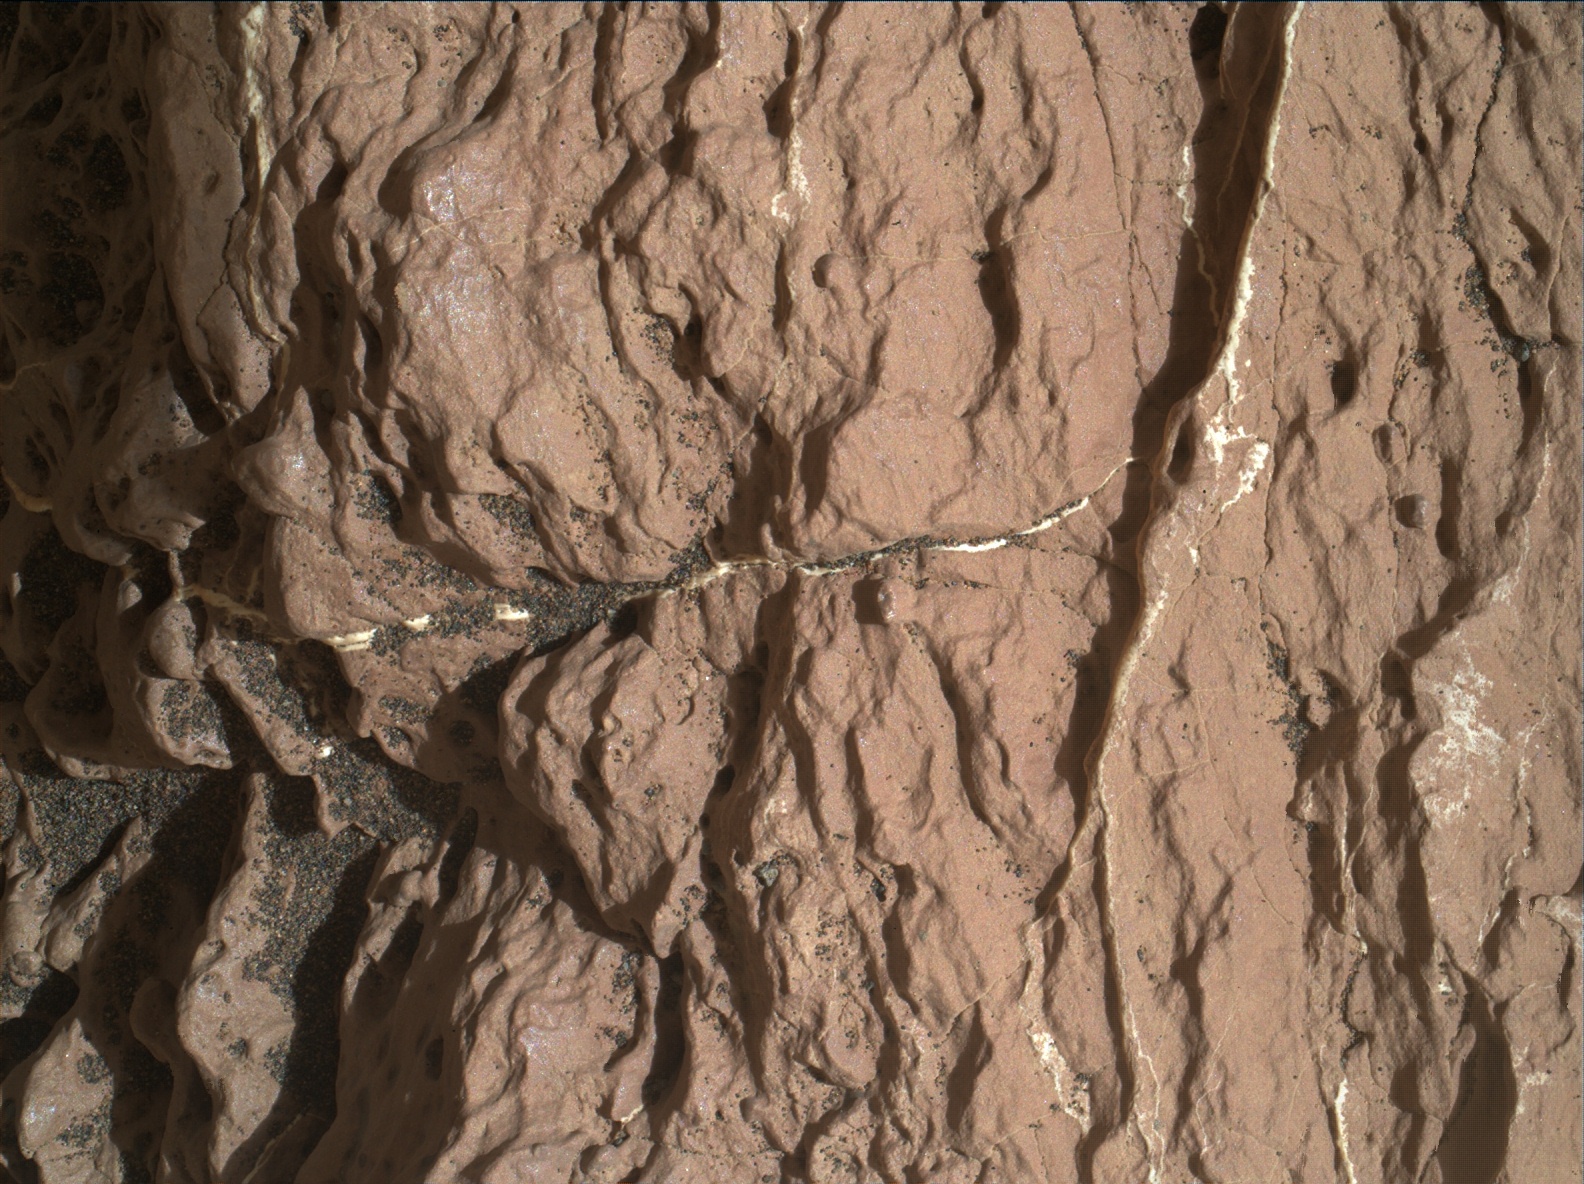 Nasa's Mars rover Curiosity acquired this image using its Mars Hand Lens Imager (MAHLI) on Sol 1585